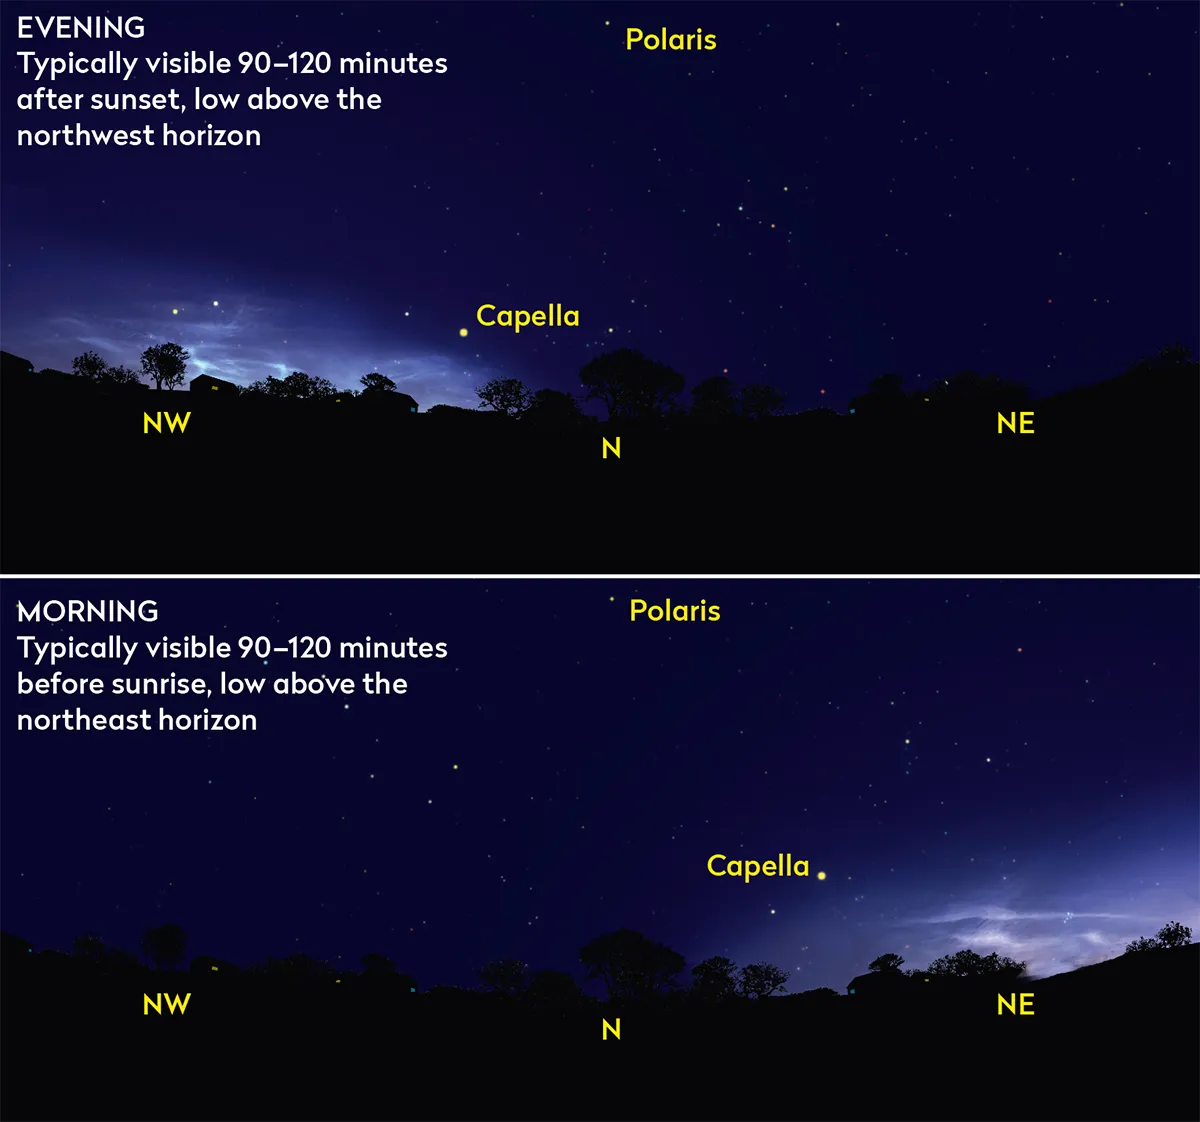 Typical NLC displays may be seen all night long, moving from the northwest, through north and ending low above the northeast horizon where they can be seen before sunrise